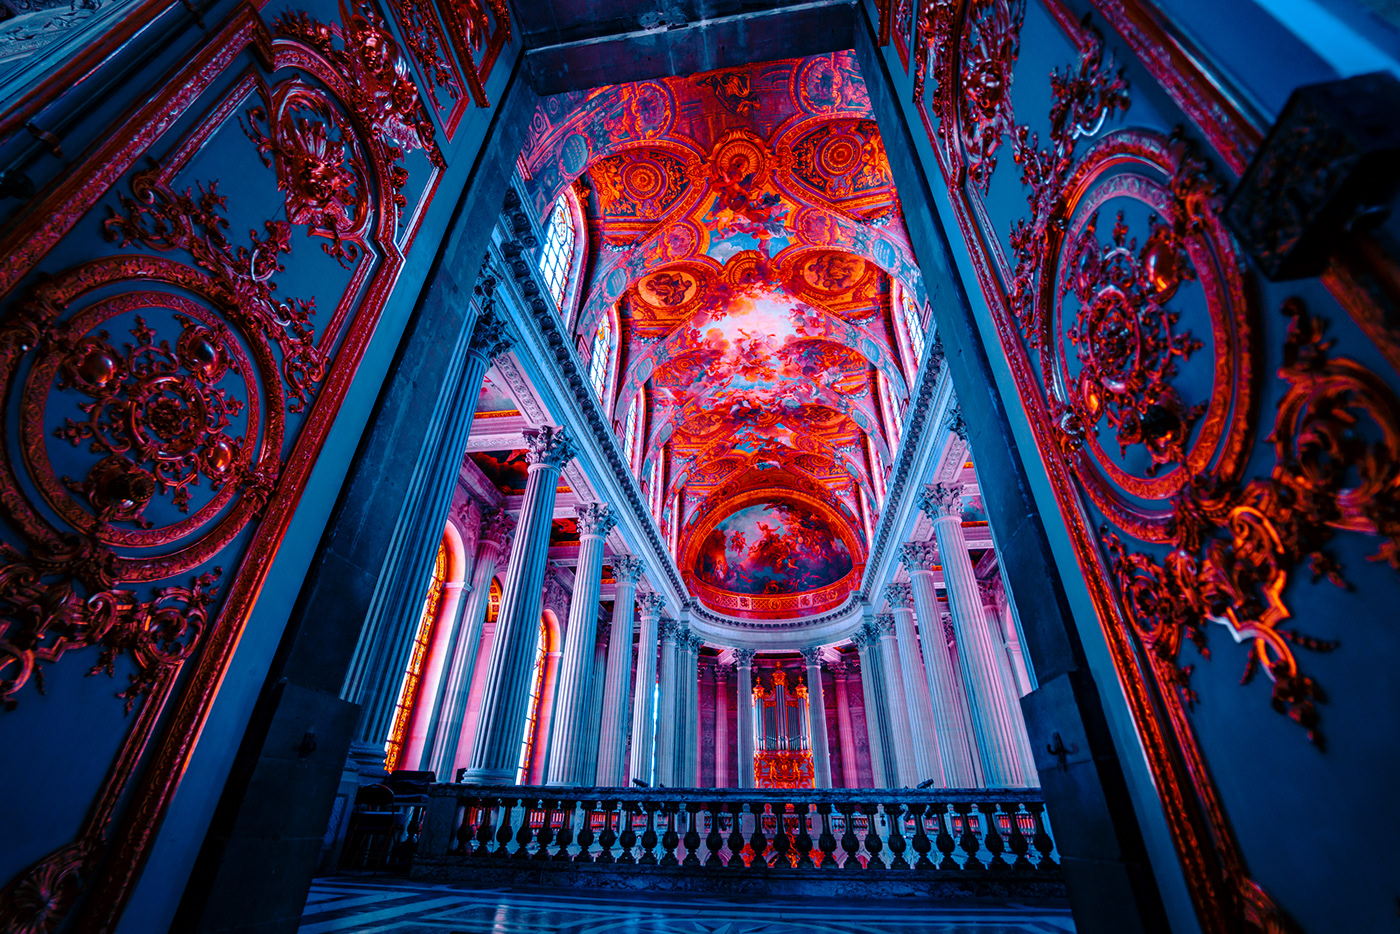 photographer Aishy took The Château de Versaille under a new look, revisited in red an blue colors.